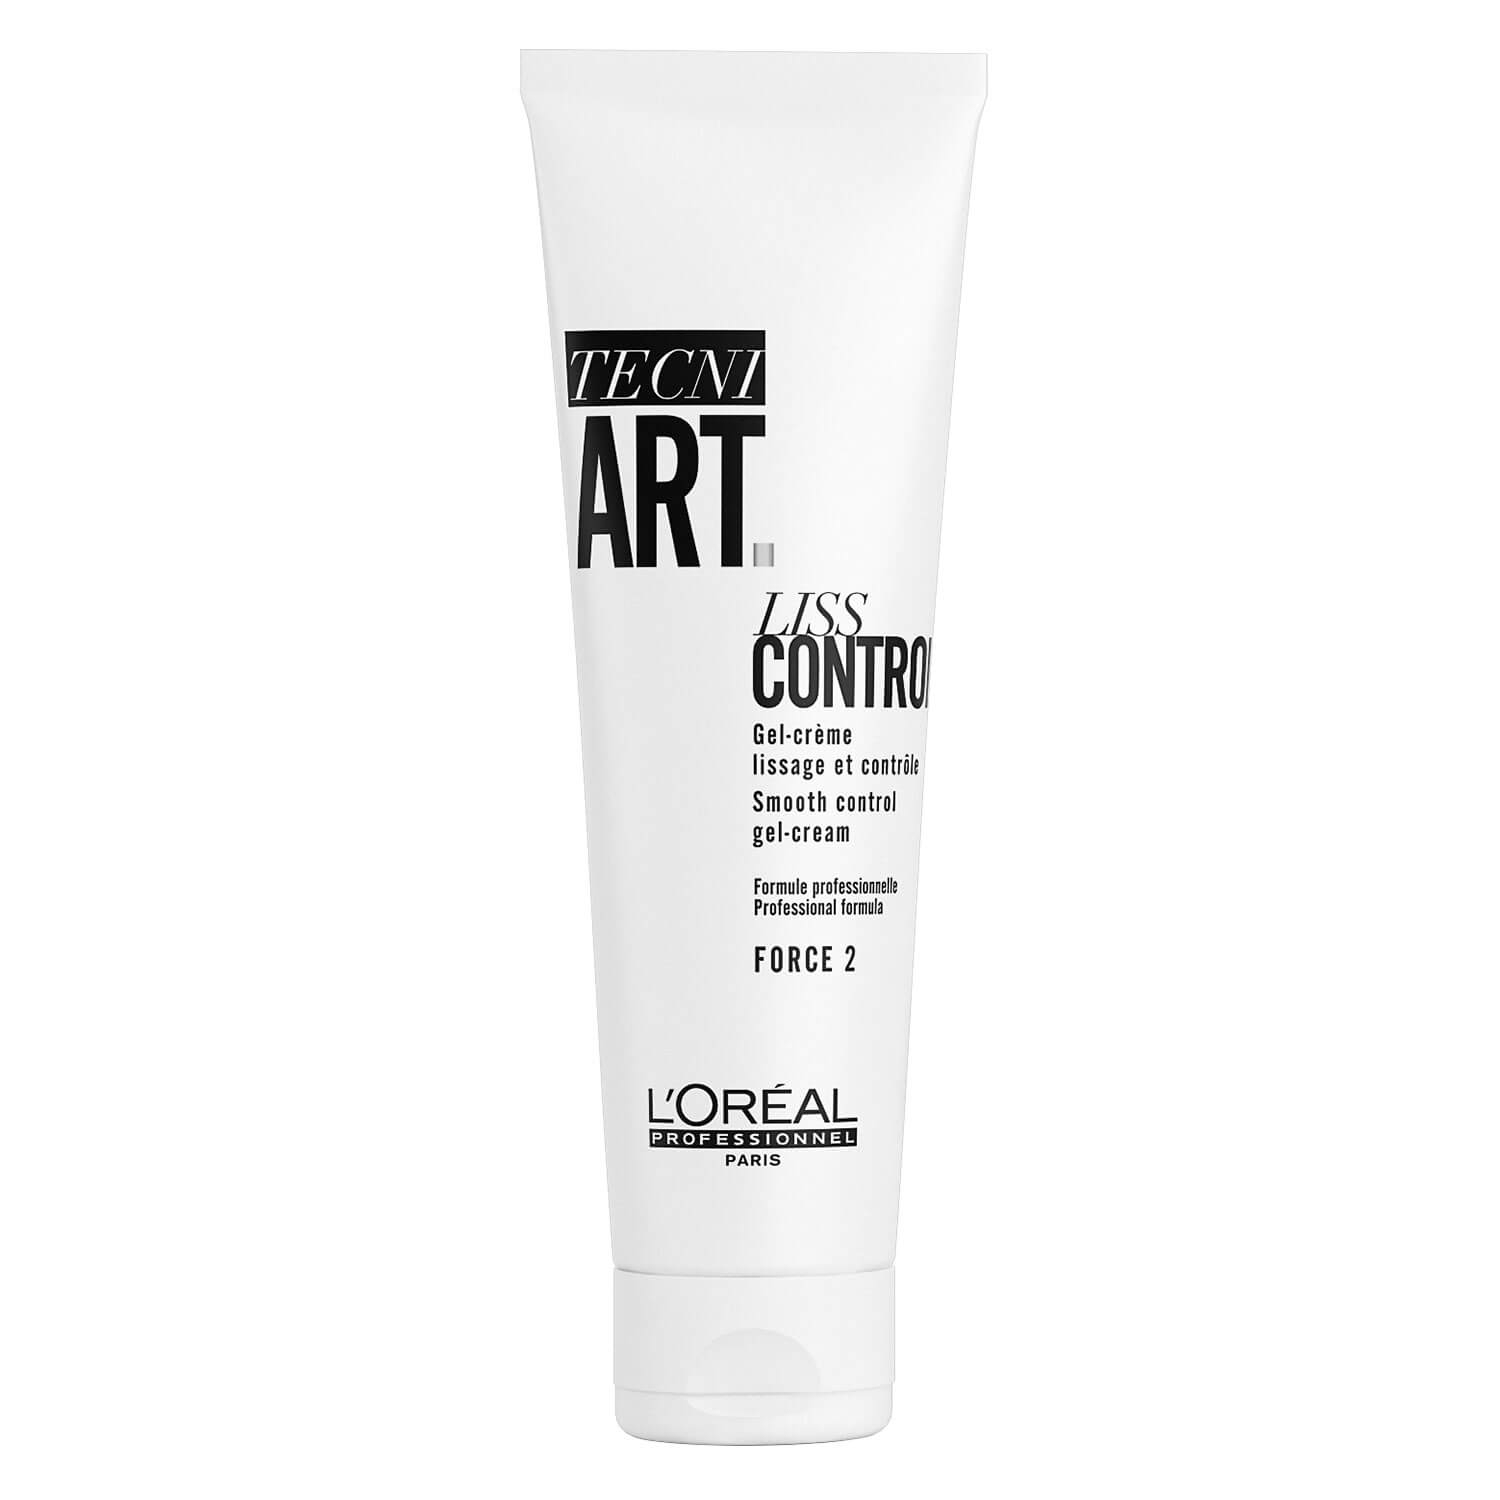 Product image from Tecni.art Essentials - Liss Control